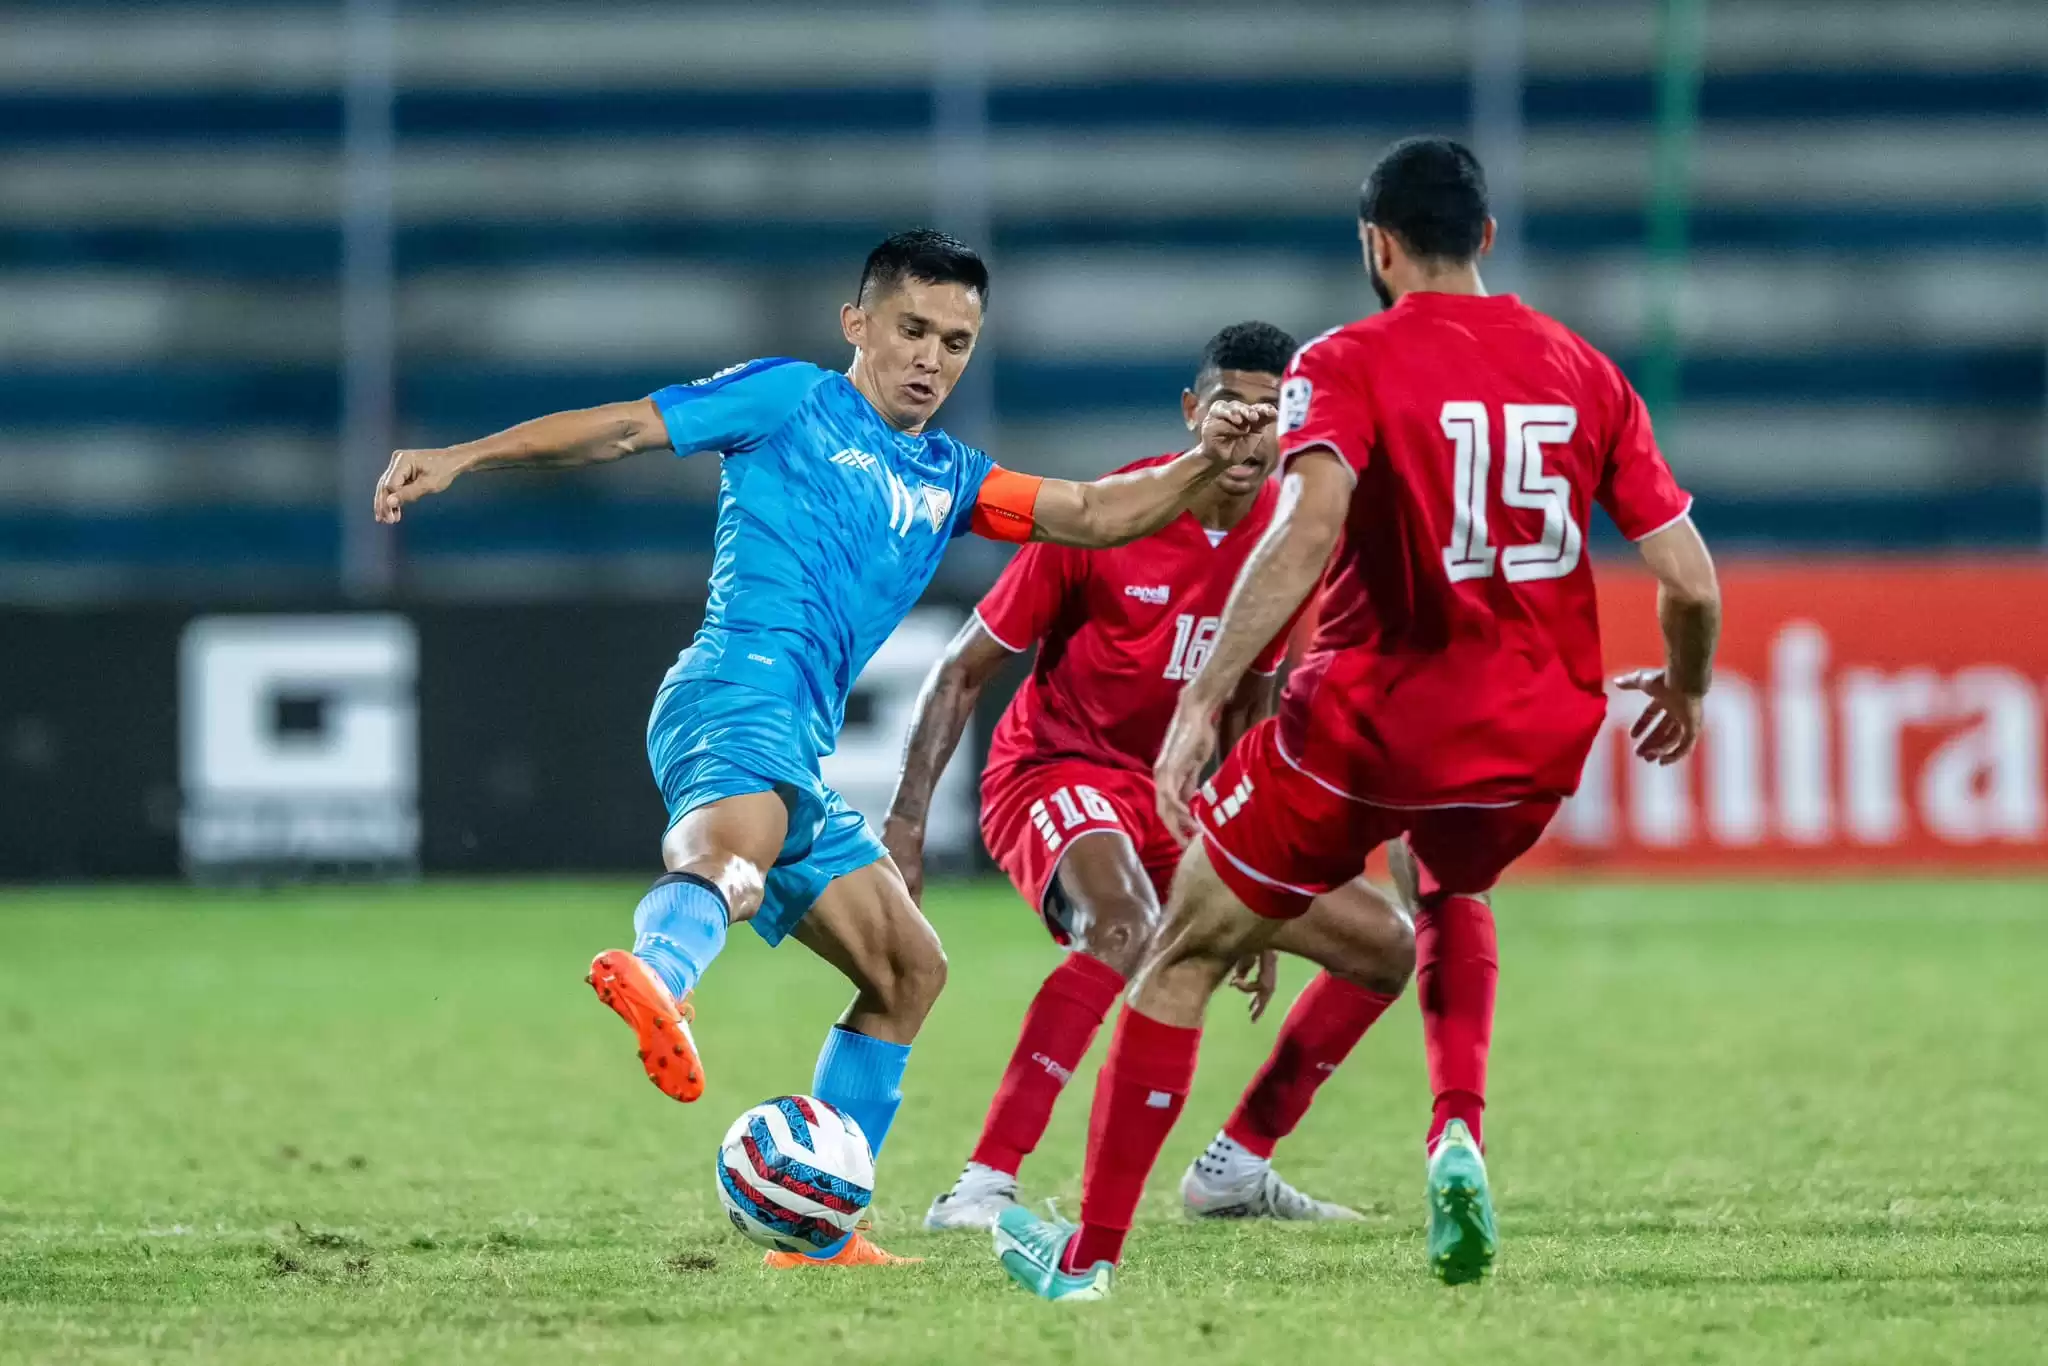 India & Kuwait in the final of SAFF Championship